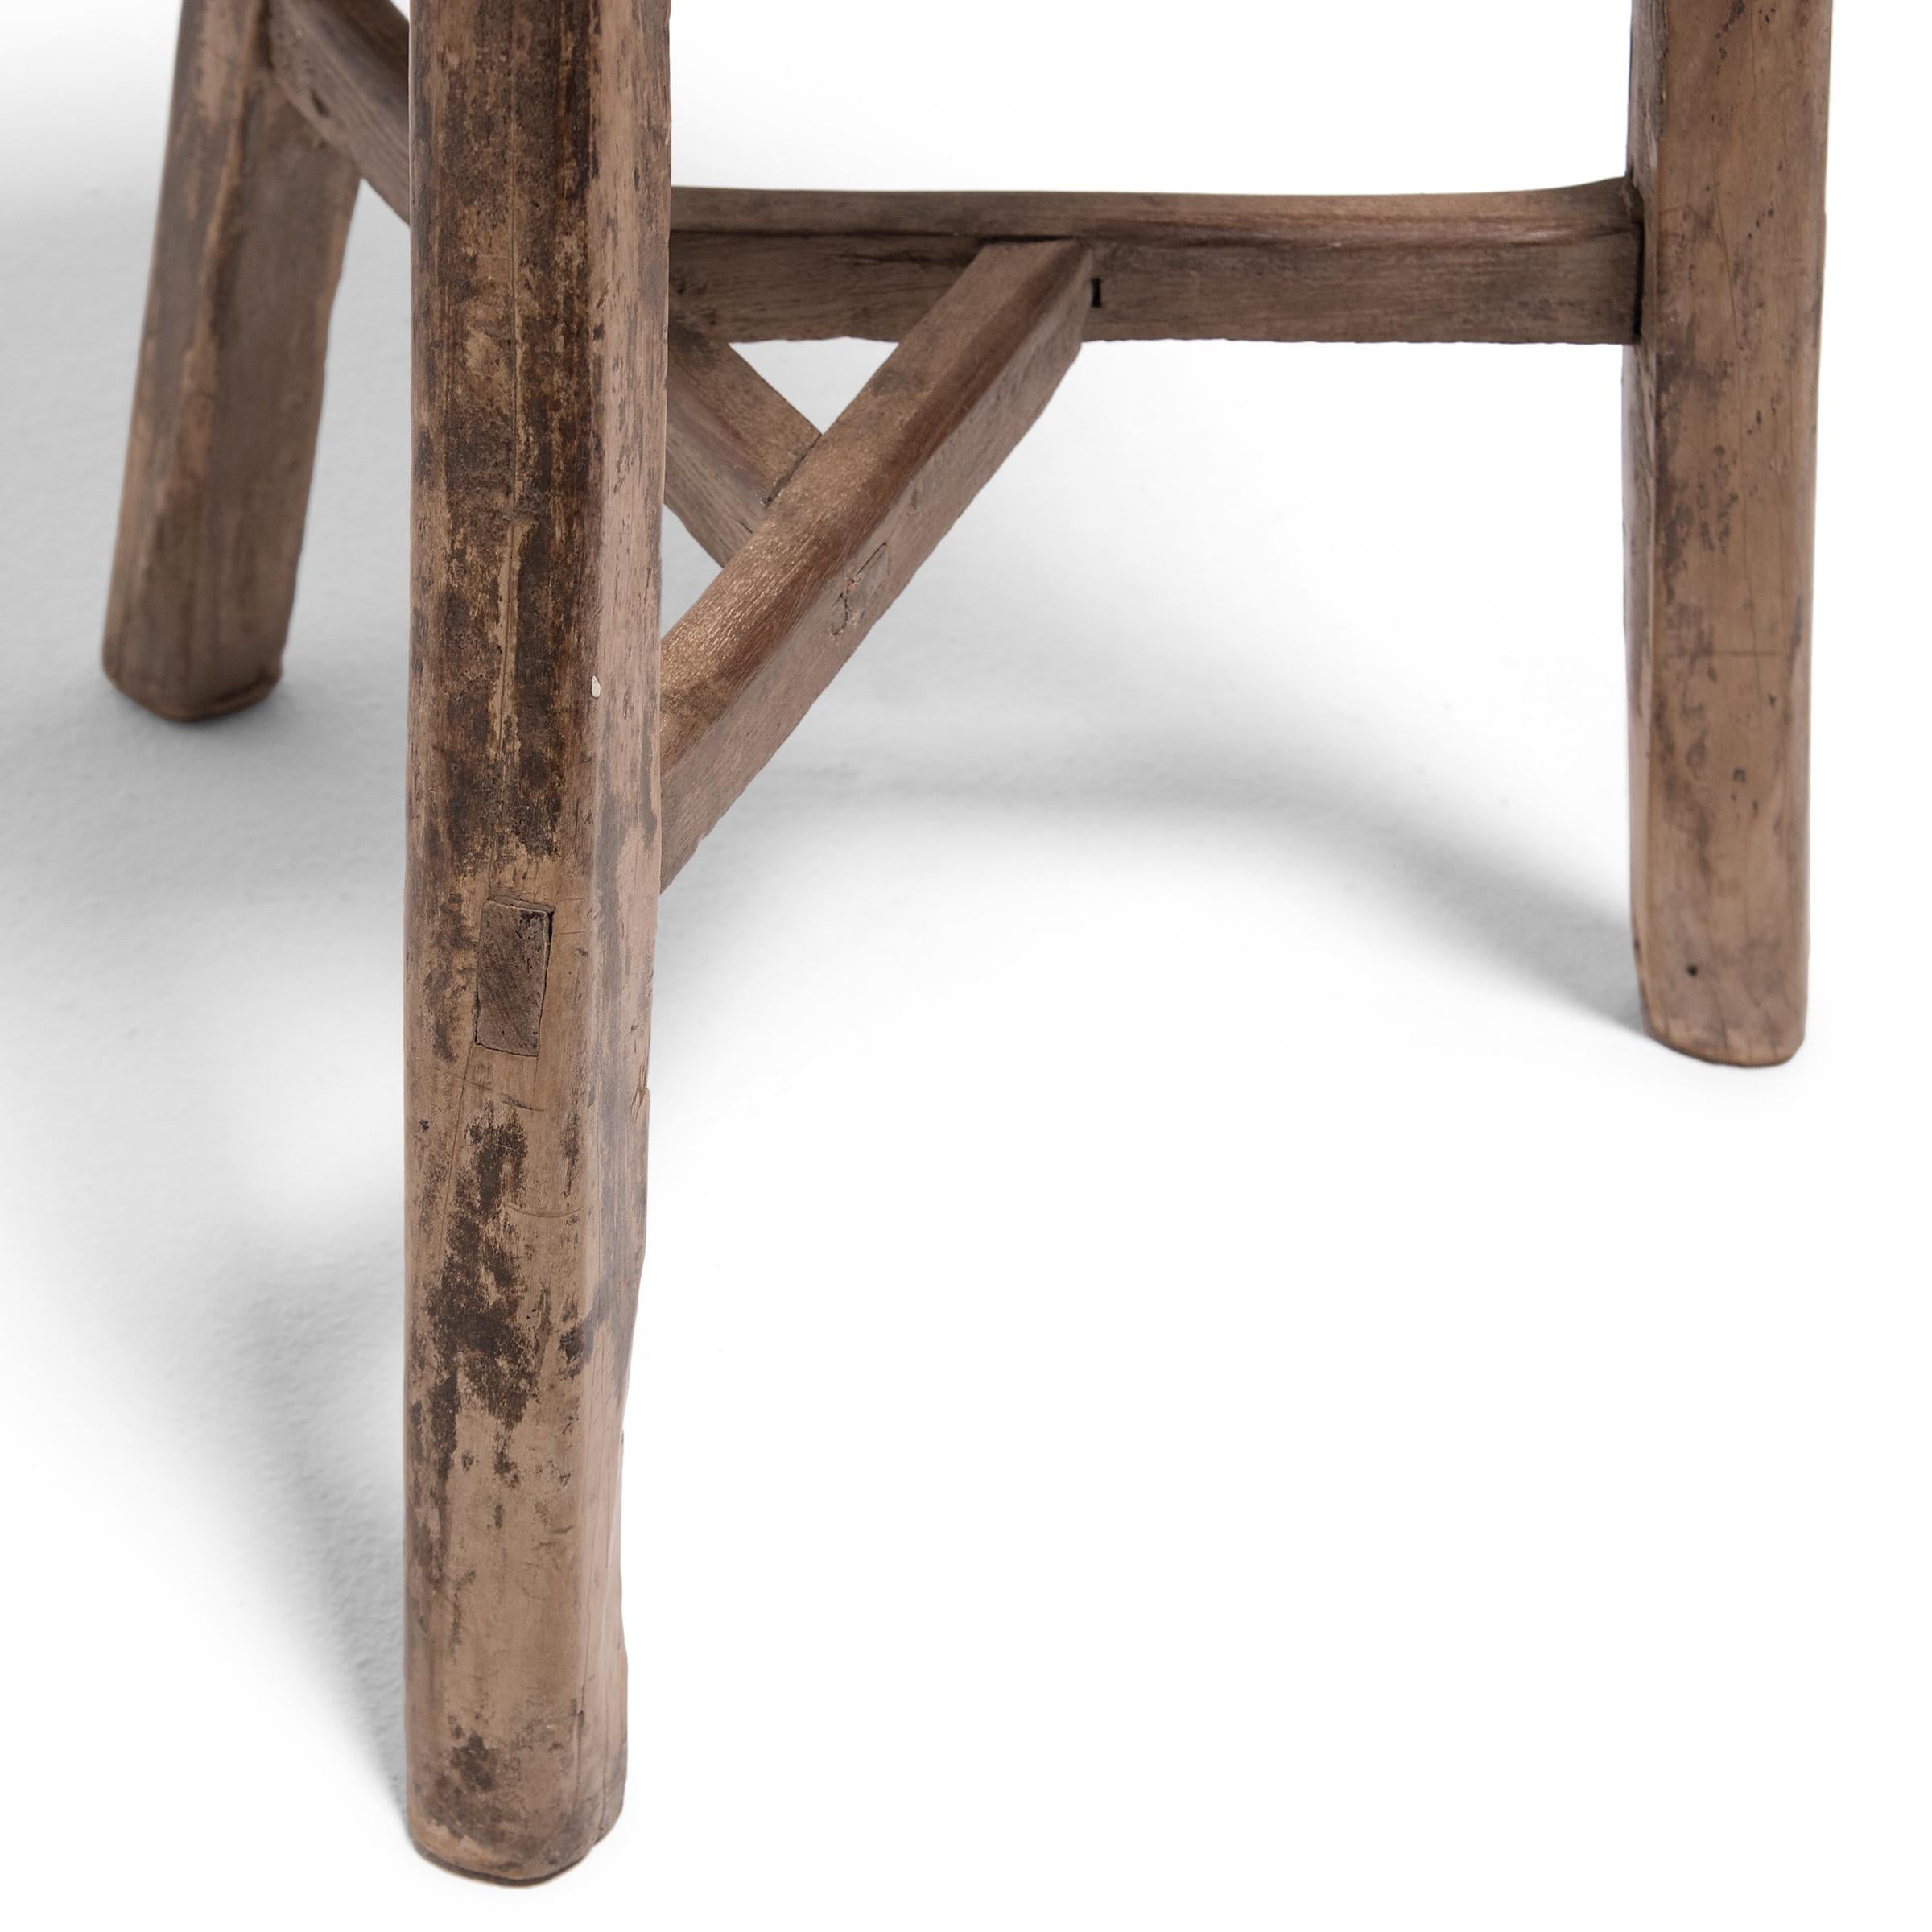 Deceptively simple, this early 20th century stool from Hebei province shows off the ingenious joinery methods traditionally used by Chinese carpenters. The stool’s three splayed legs are supported by stretcher bars that interlock at the center to